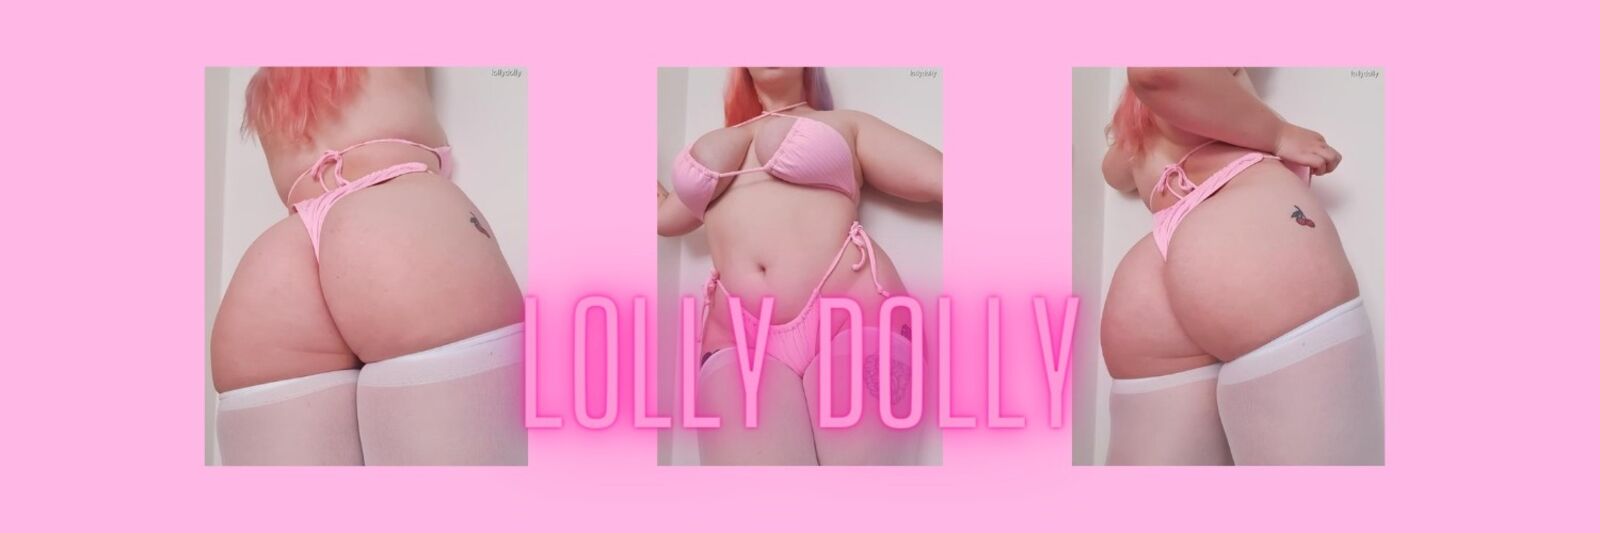 See Lolly Dolly profile